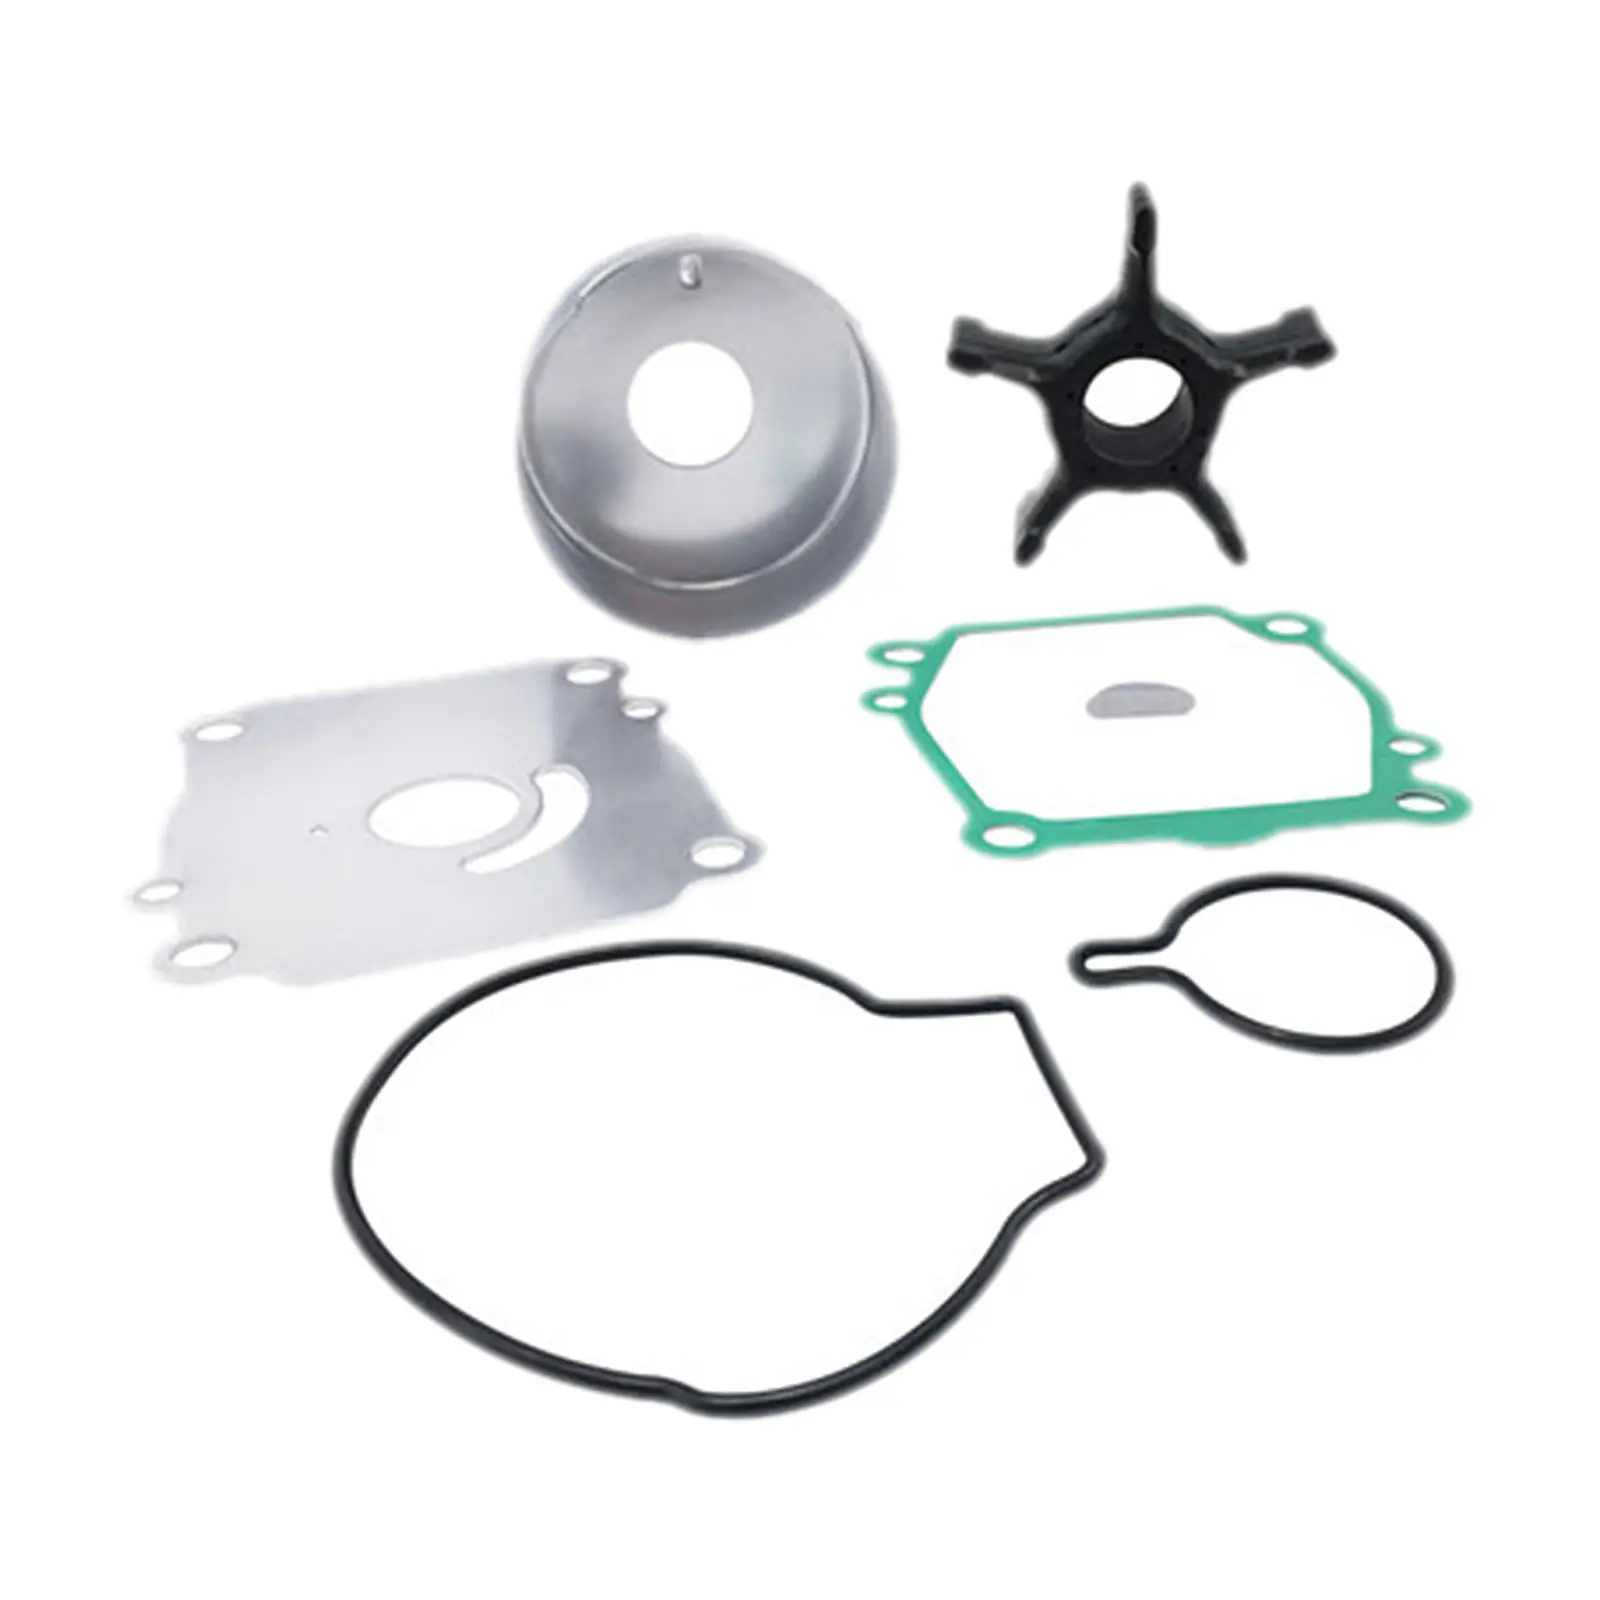 Water Pump Impeller Service Kit 17400-92J00 fits for Suzuki Outboards, Boat Motor Spare Parts High Reliability